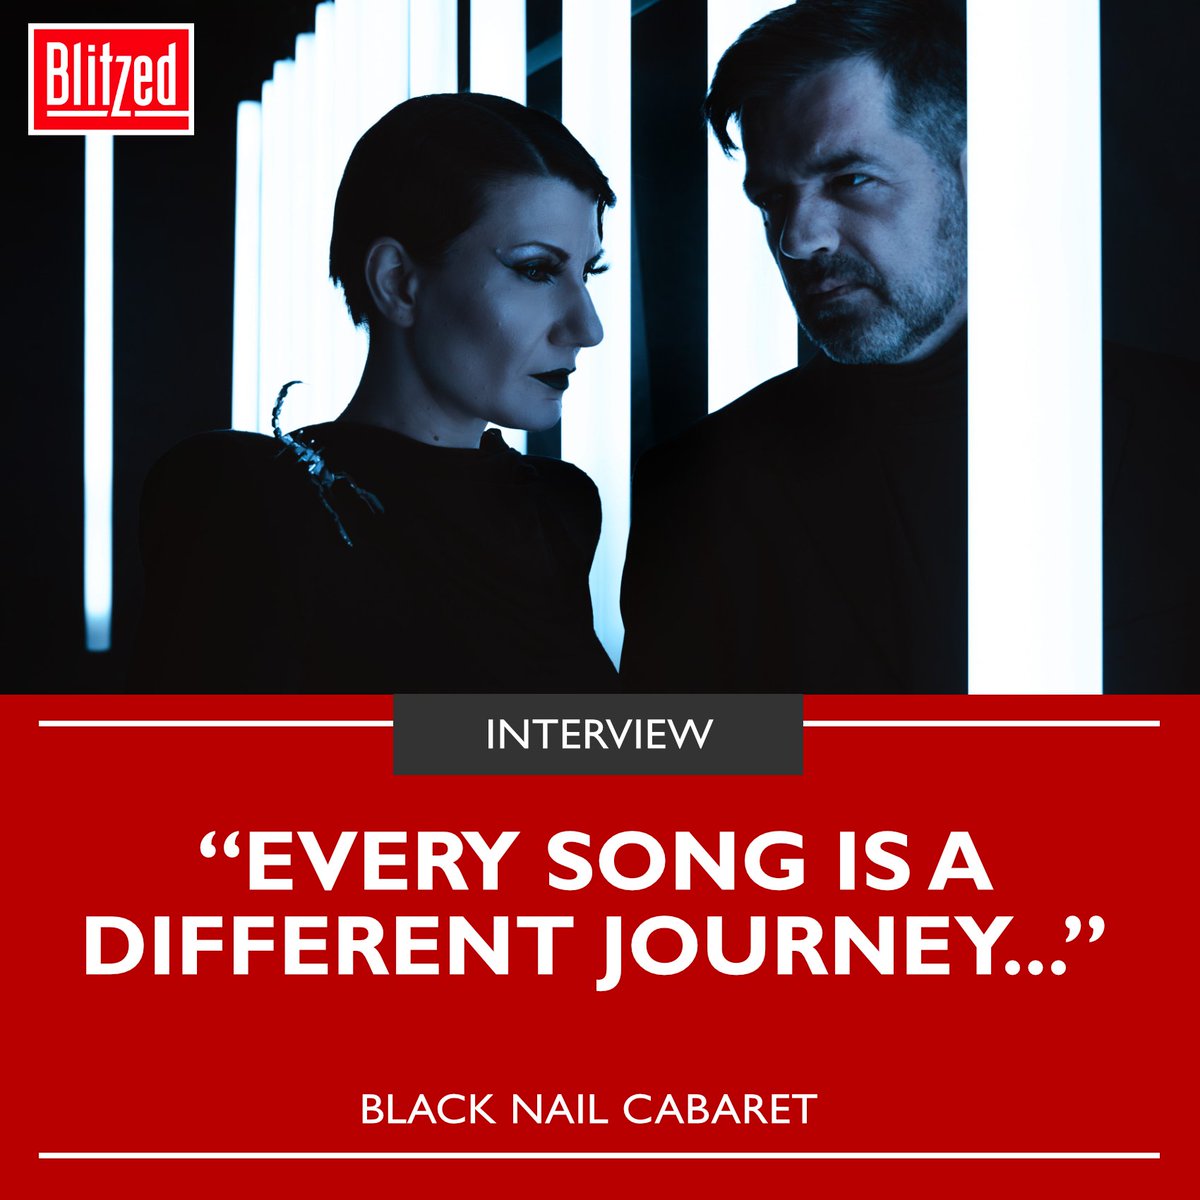 In the new issue of Blitzed we speak to Black Nail Cabaret @Black_Nails ahead of the release of their new album 'Chrysanthemum', plus we cast an eye over the album in our reviews section. Subscribe to Blitzed today! 🔥 blitzedmag.com/subscribe/